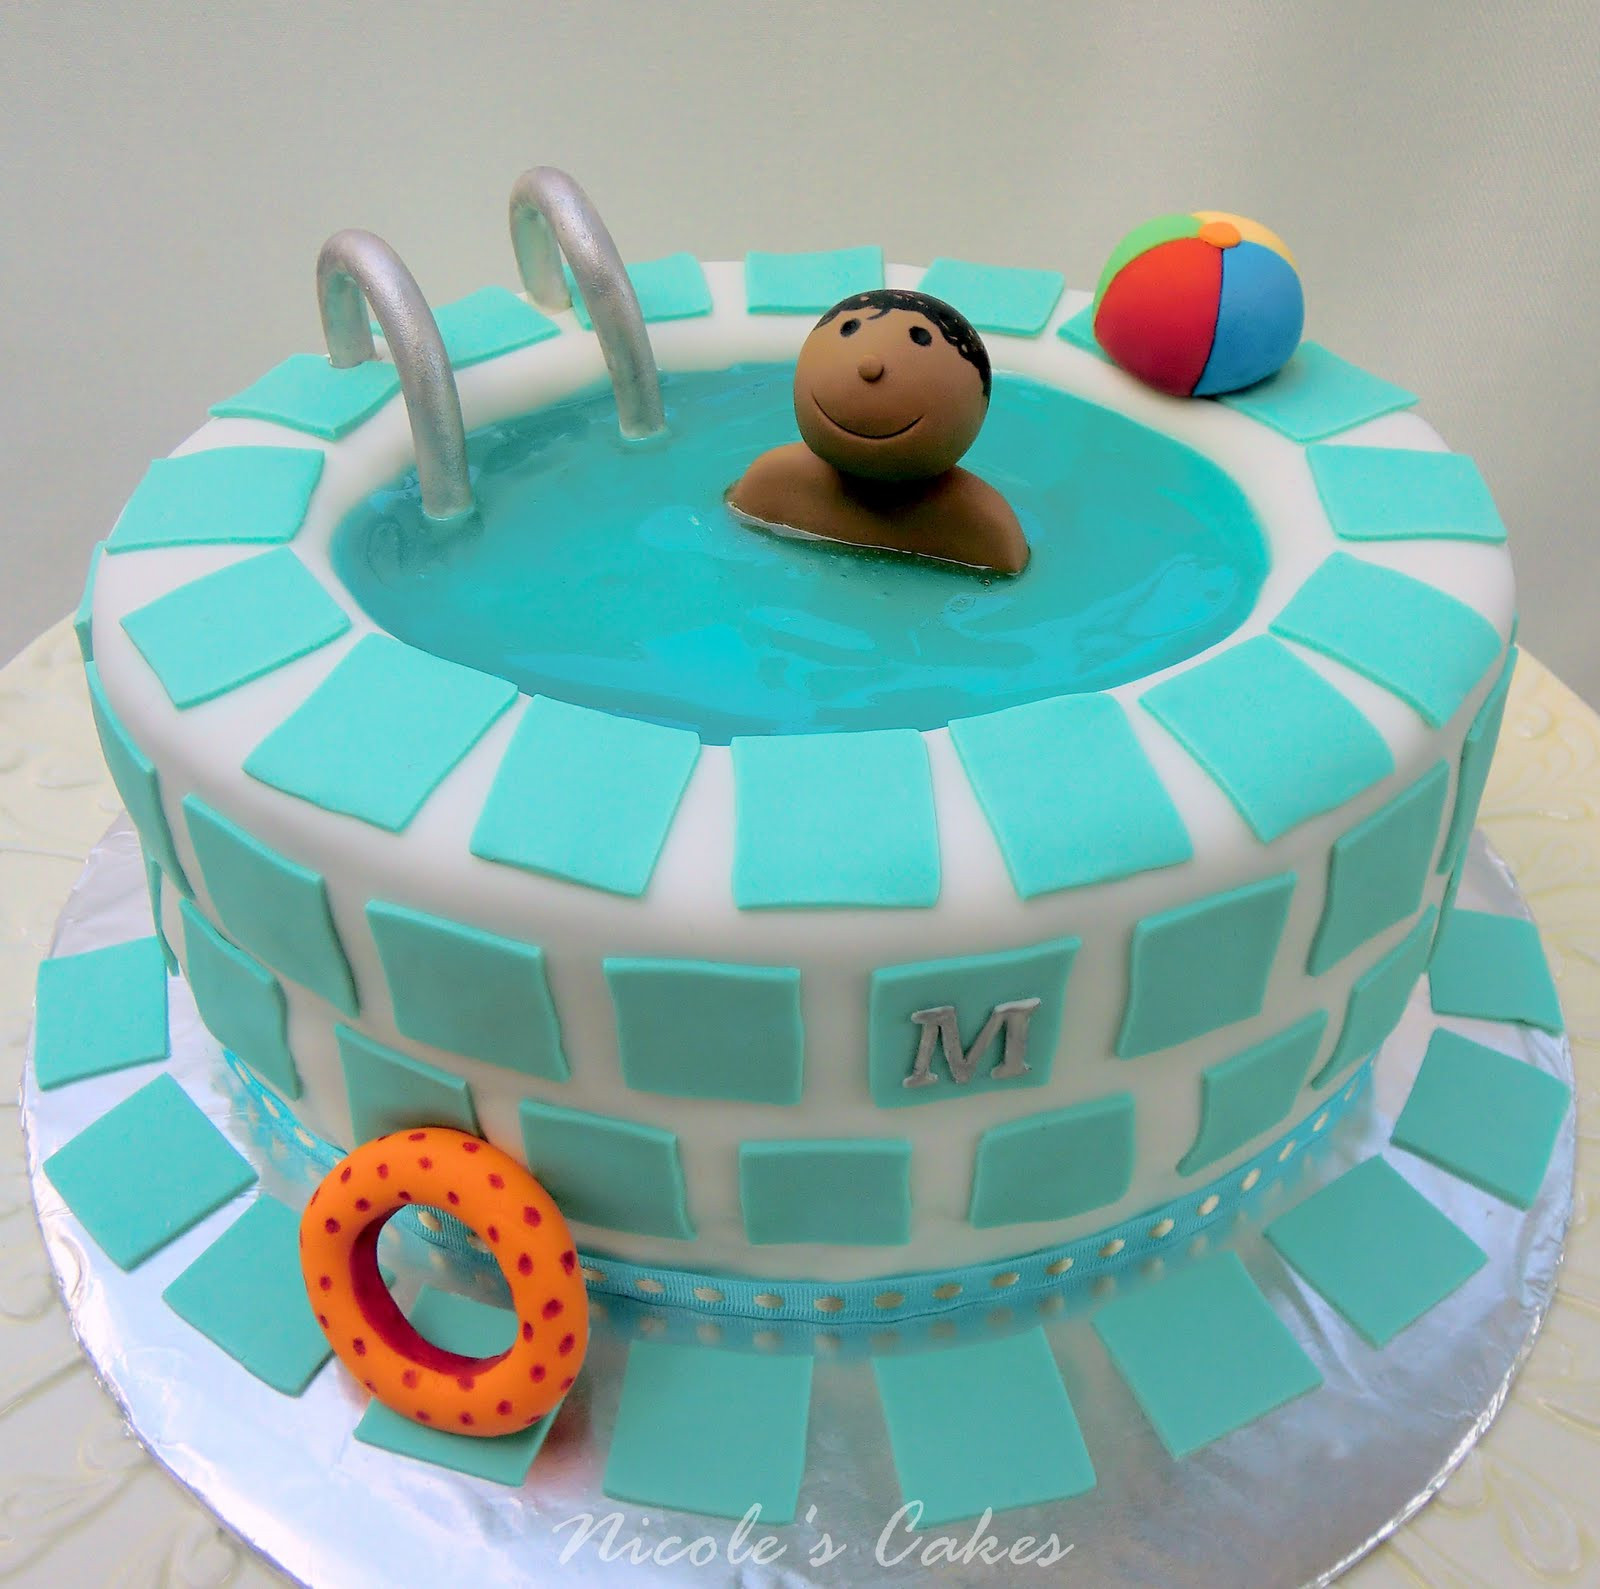 Pool Party Birthday Cakes
 Confections Cakes & Creations July 2011